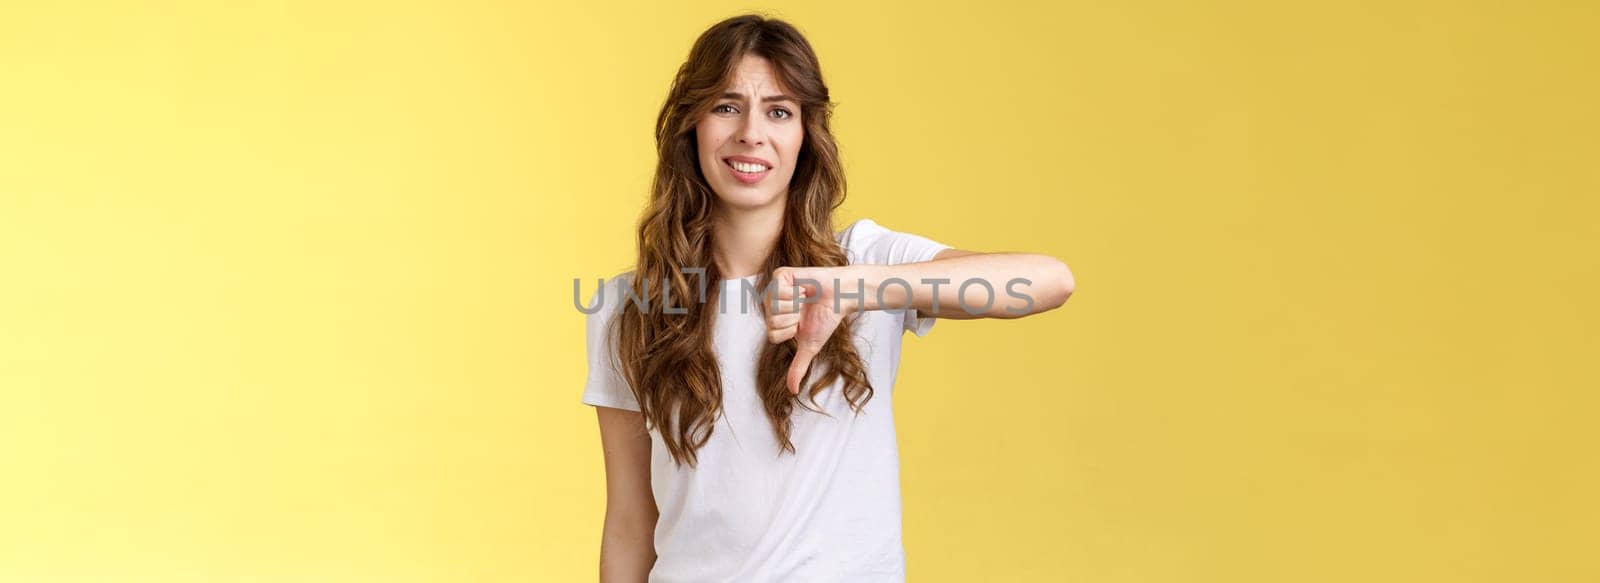 So lame you loser. Ignorant snobbish good-looking woman give own judgement negative opinion disagree grimacing cringe dislike show thumb down disappointed unimpressed yellow background.